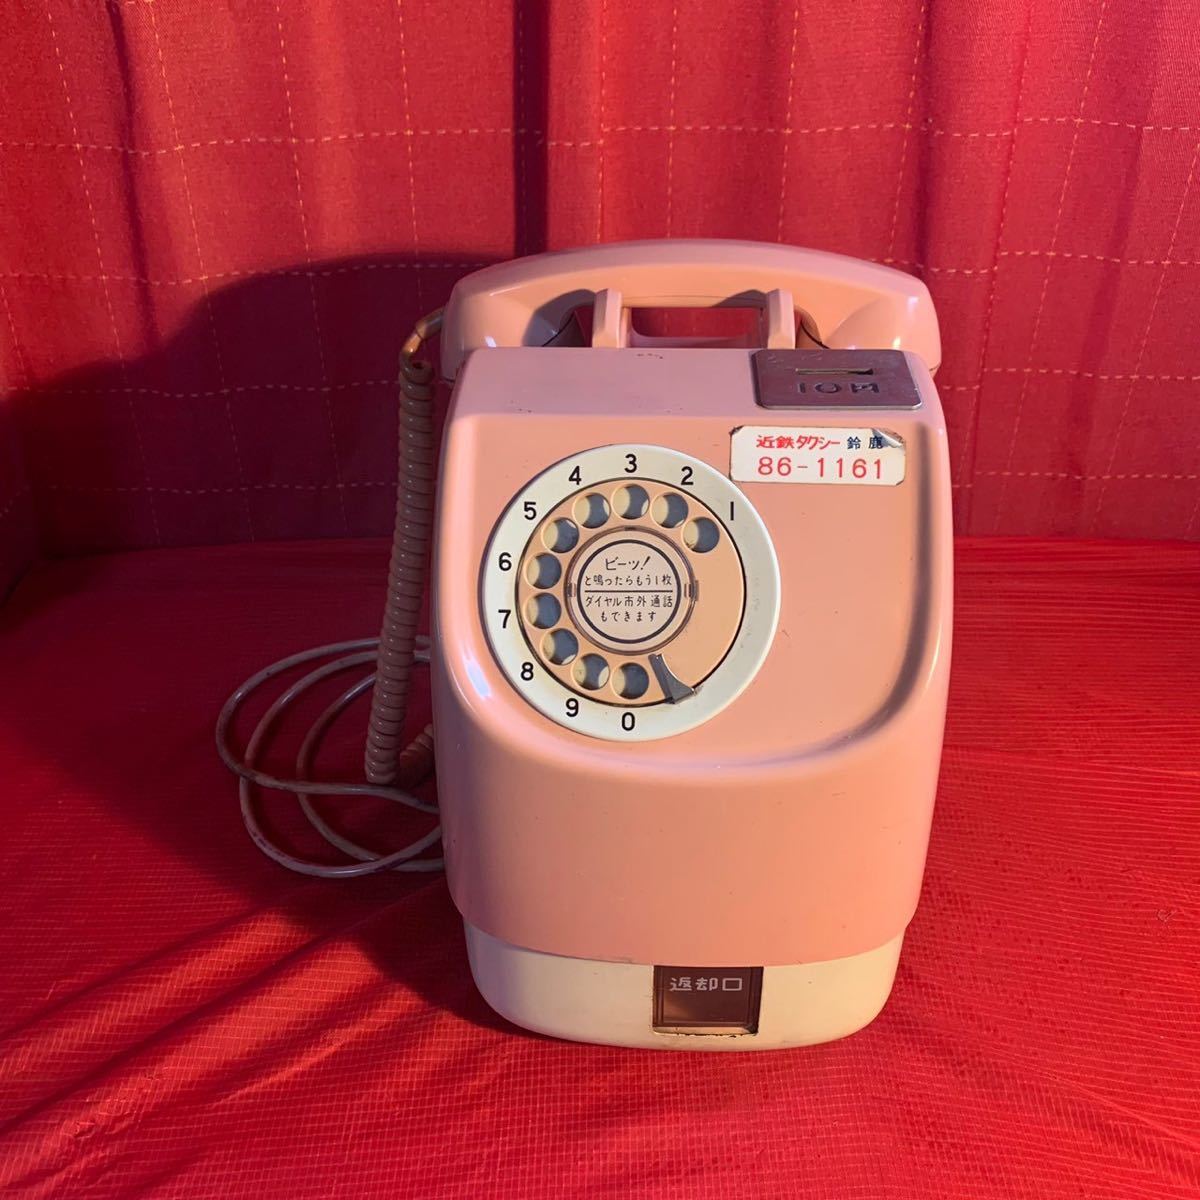  Showa Retro public telephone pink telephone antique dial type that time thing 